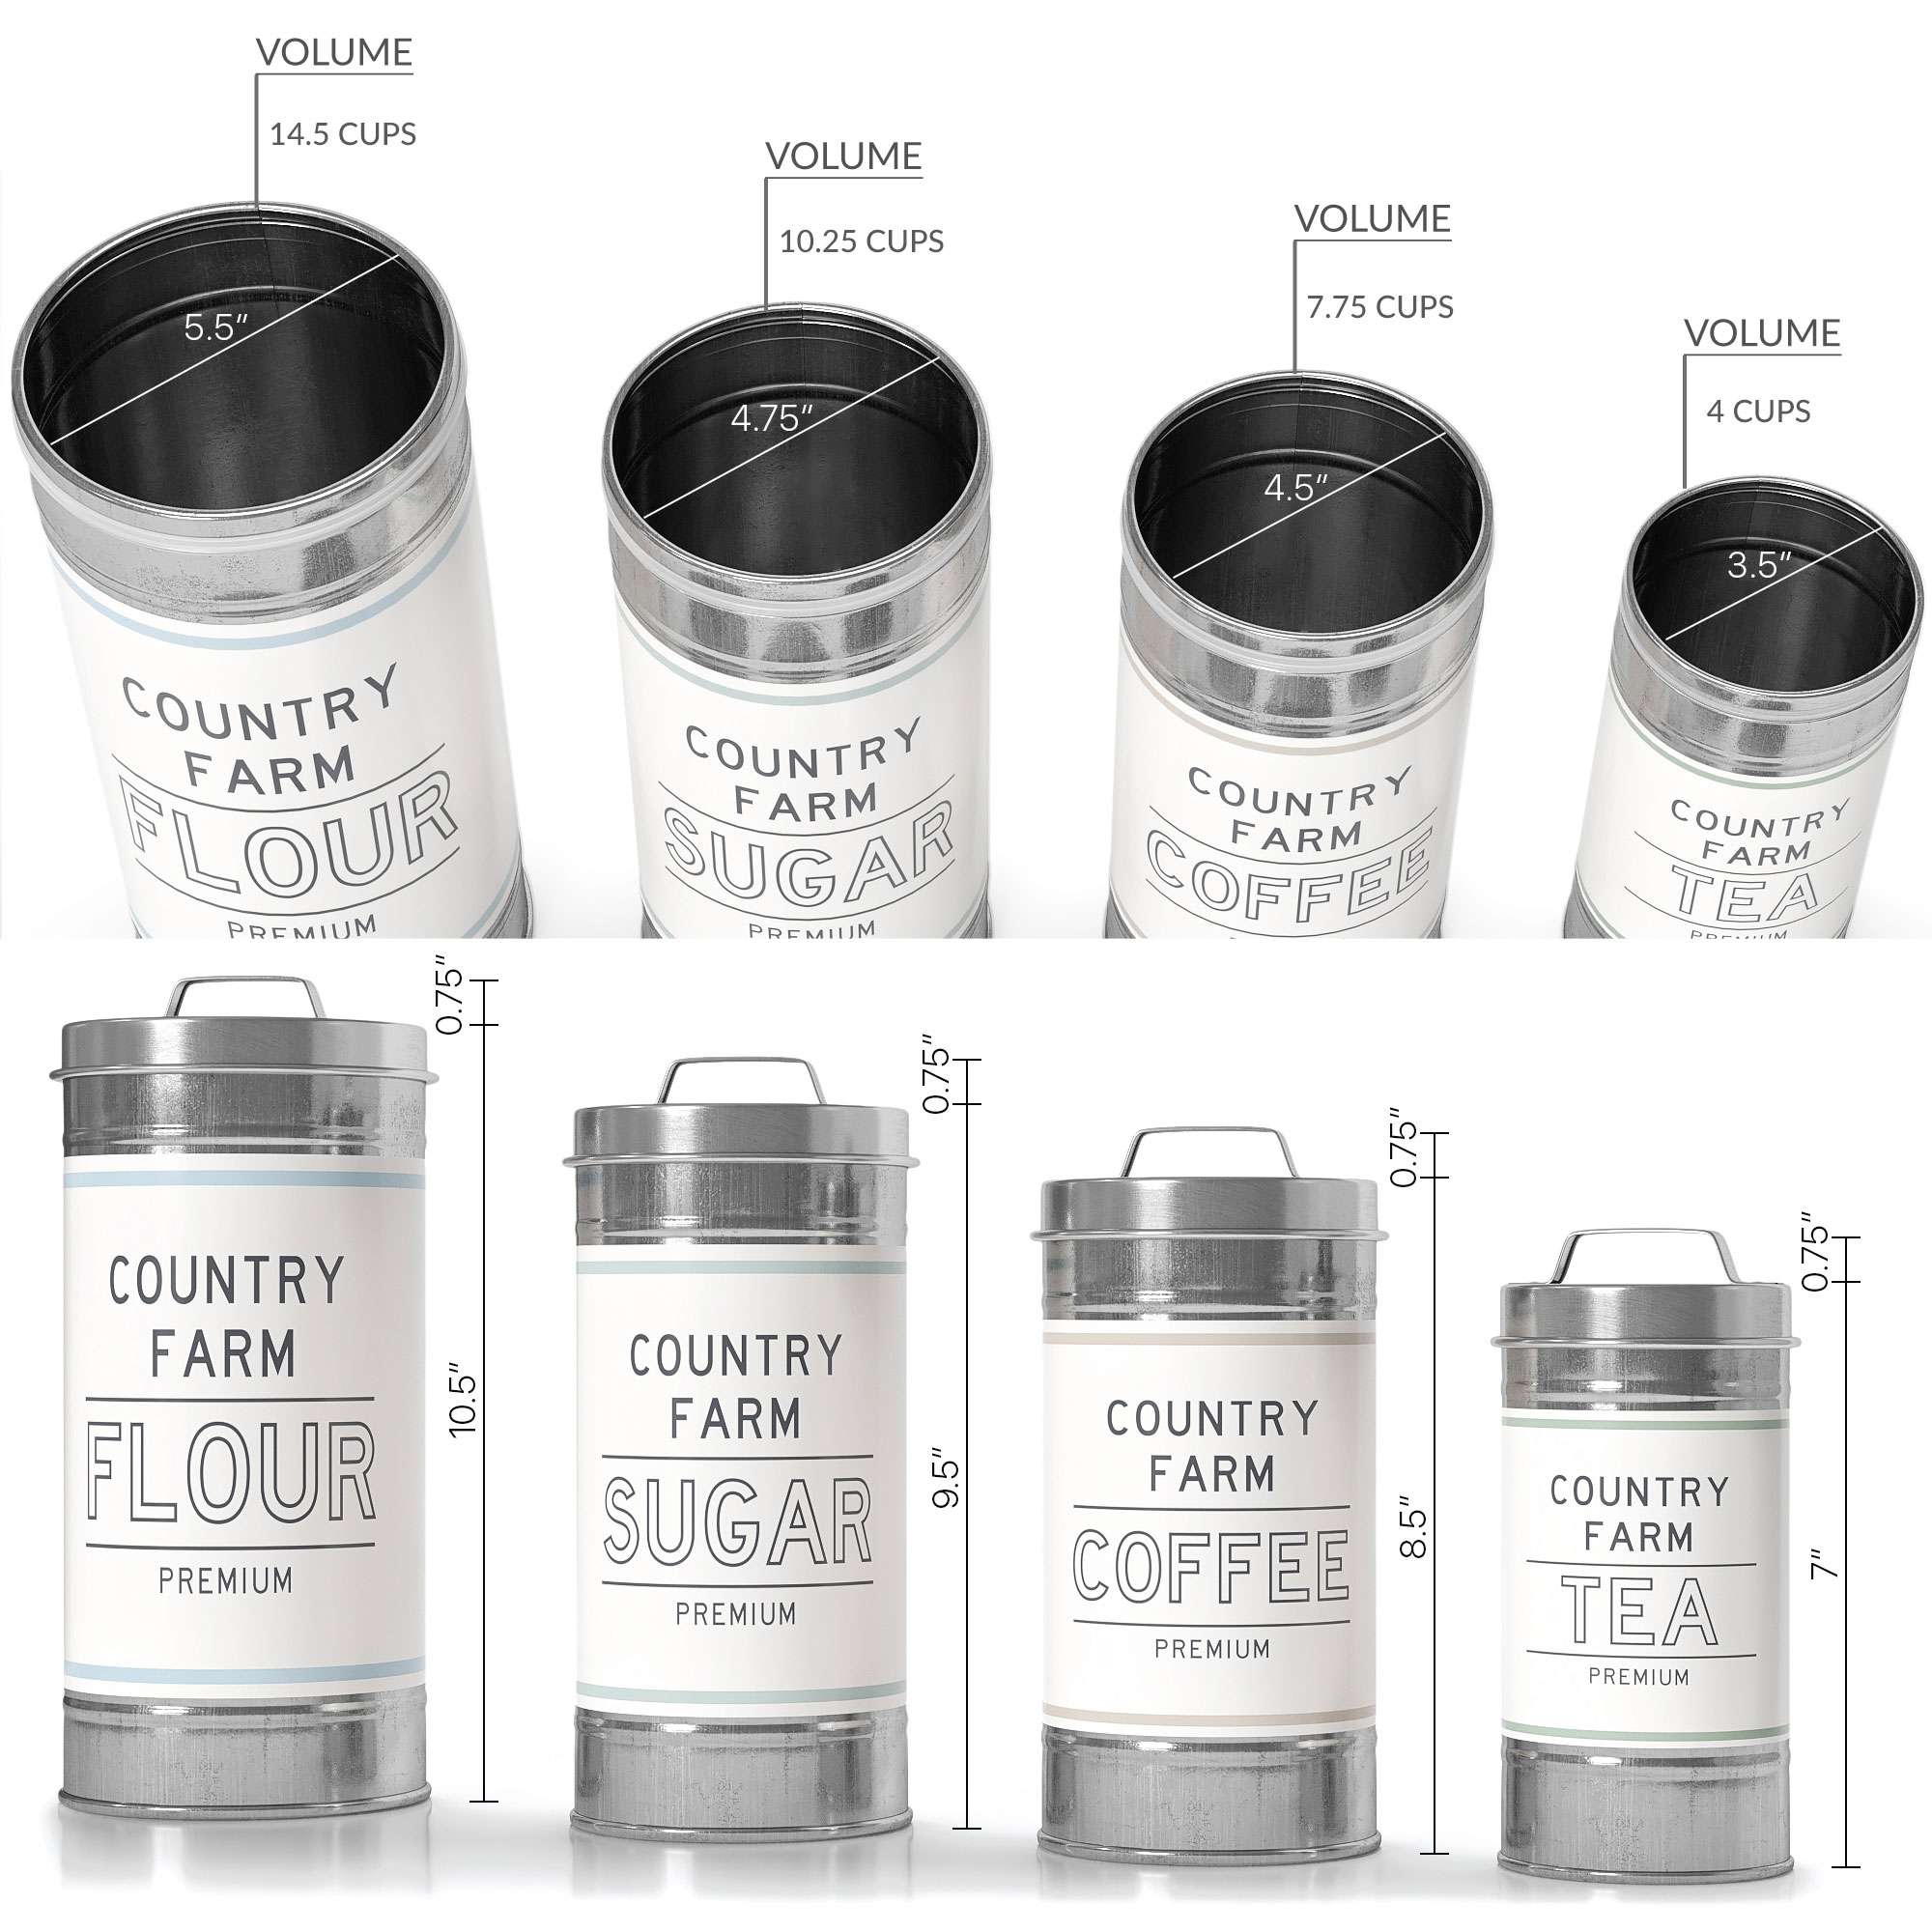 Barnyard Designs Metal Canister Sets for Kitchen Counter Vintage Kitchen Canisters, Country Rustic Farmhouse Decor for the Kitchen, Coffee Tea Sugar Flour Farmhouse Kitchen Decor, Set of 4 - image 4 of 6